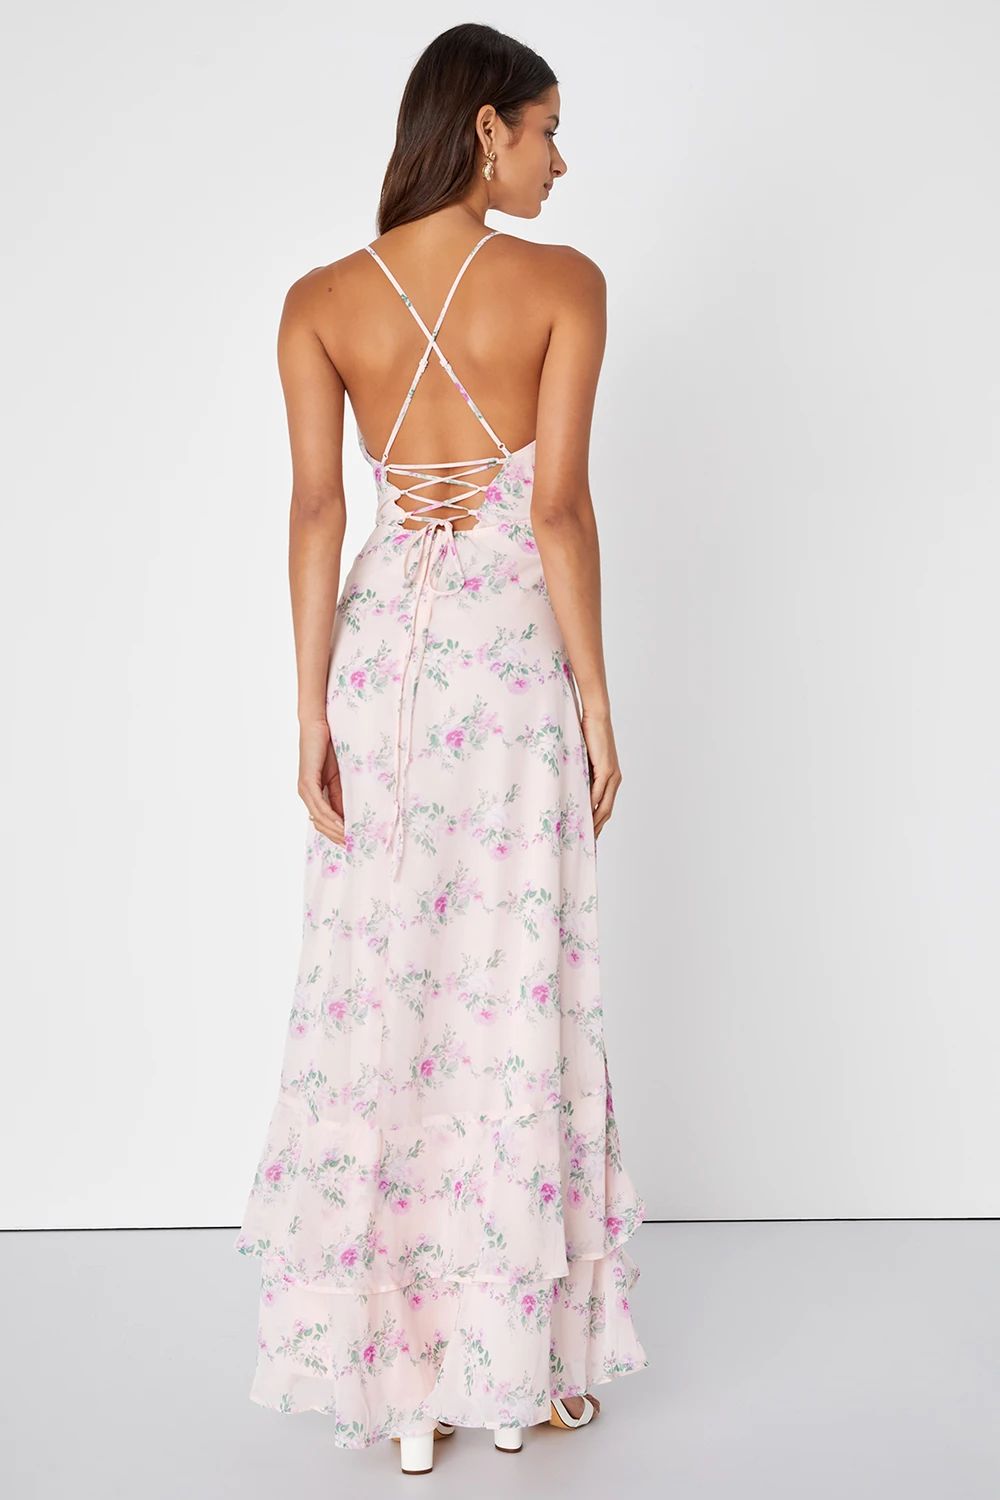 In Love Forever Blush Floral Lace-Up High-Low Maxi Dress | Lulus (US)